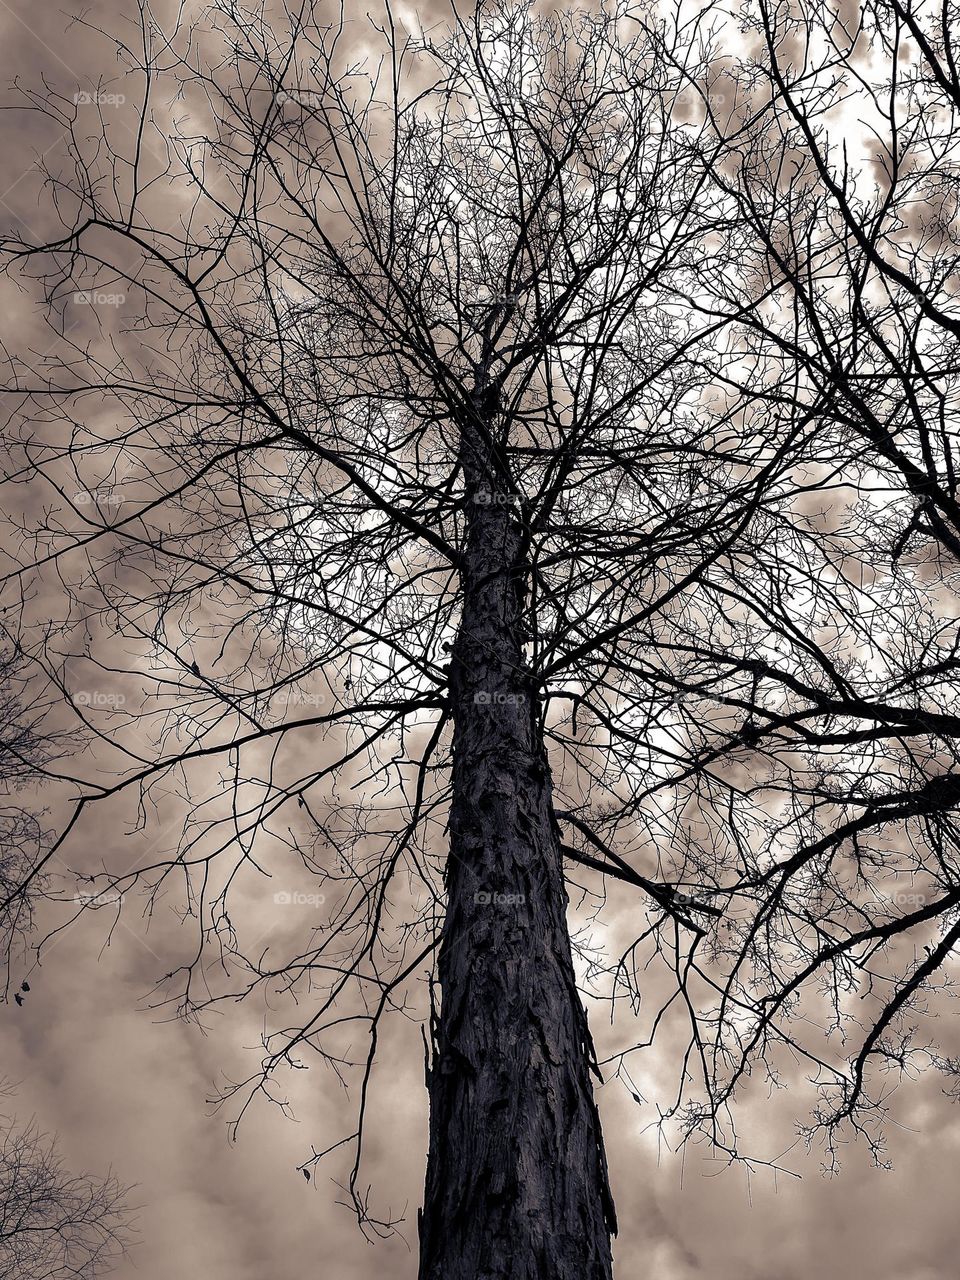 Tree bark sticks branches clouds creepy spooky Moody photography photo iPhone phone plant no leaves fall winter branch gloomy cool tones texture upwards View nature Outdoors